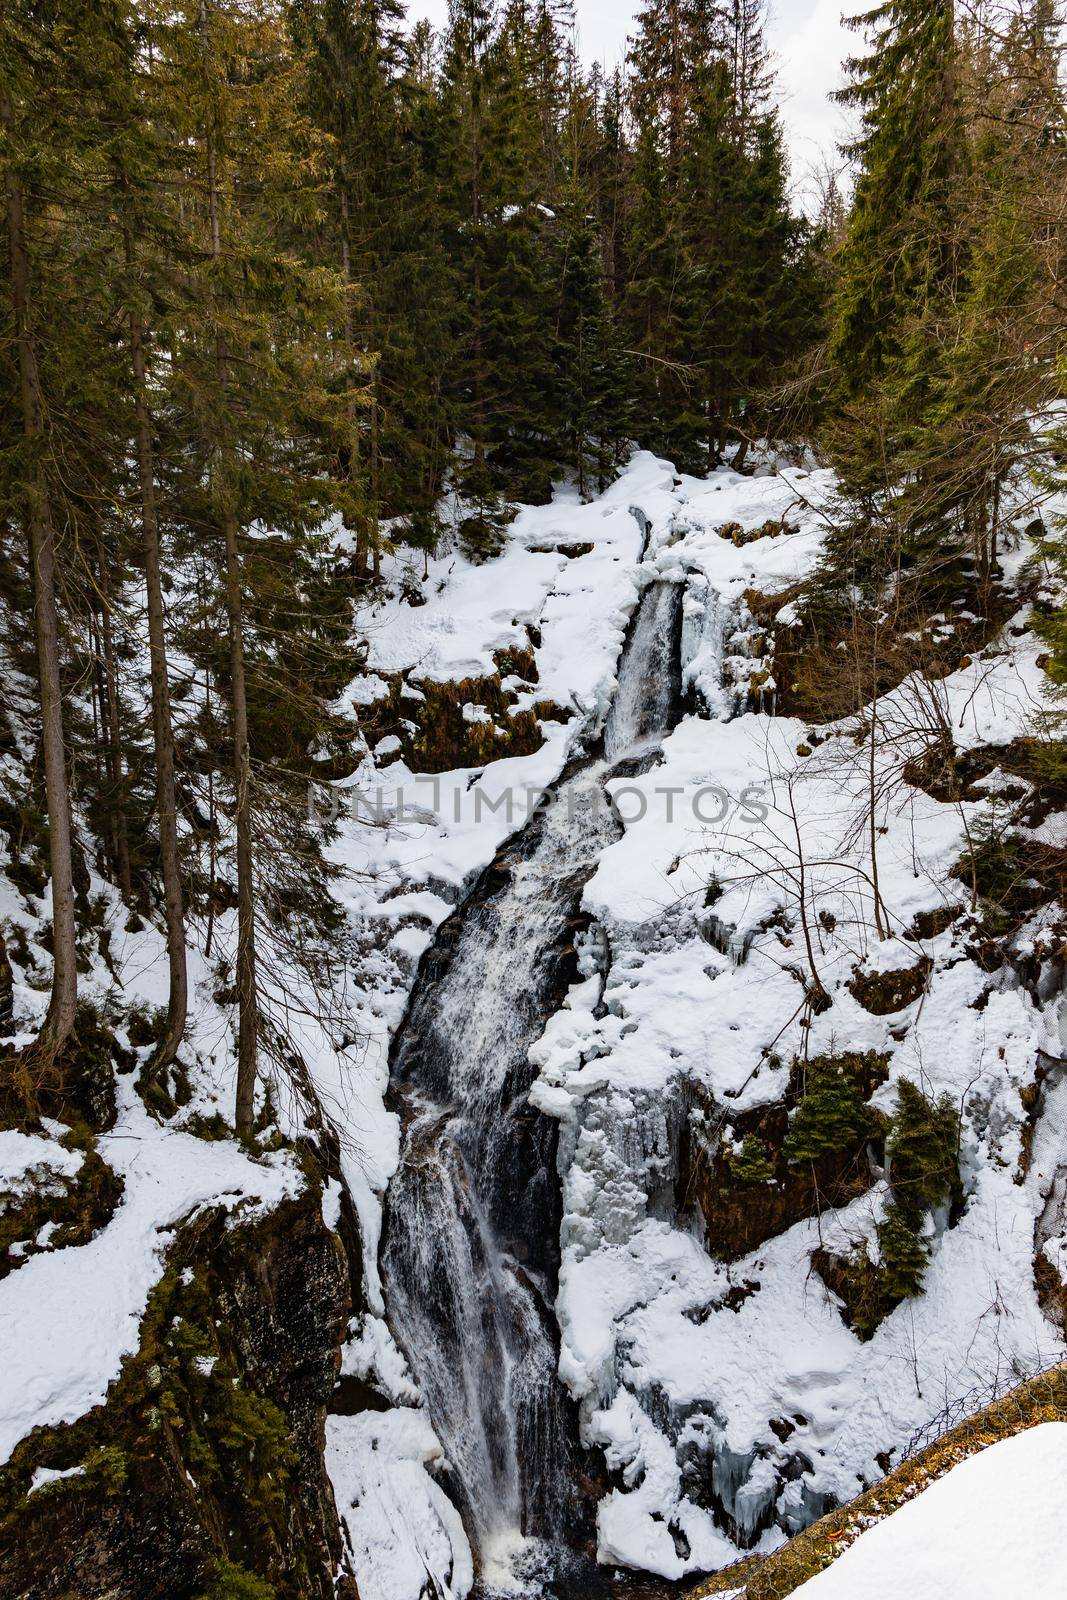 Long high waterfall in mountains full of snow and ice around by Wierzchu